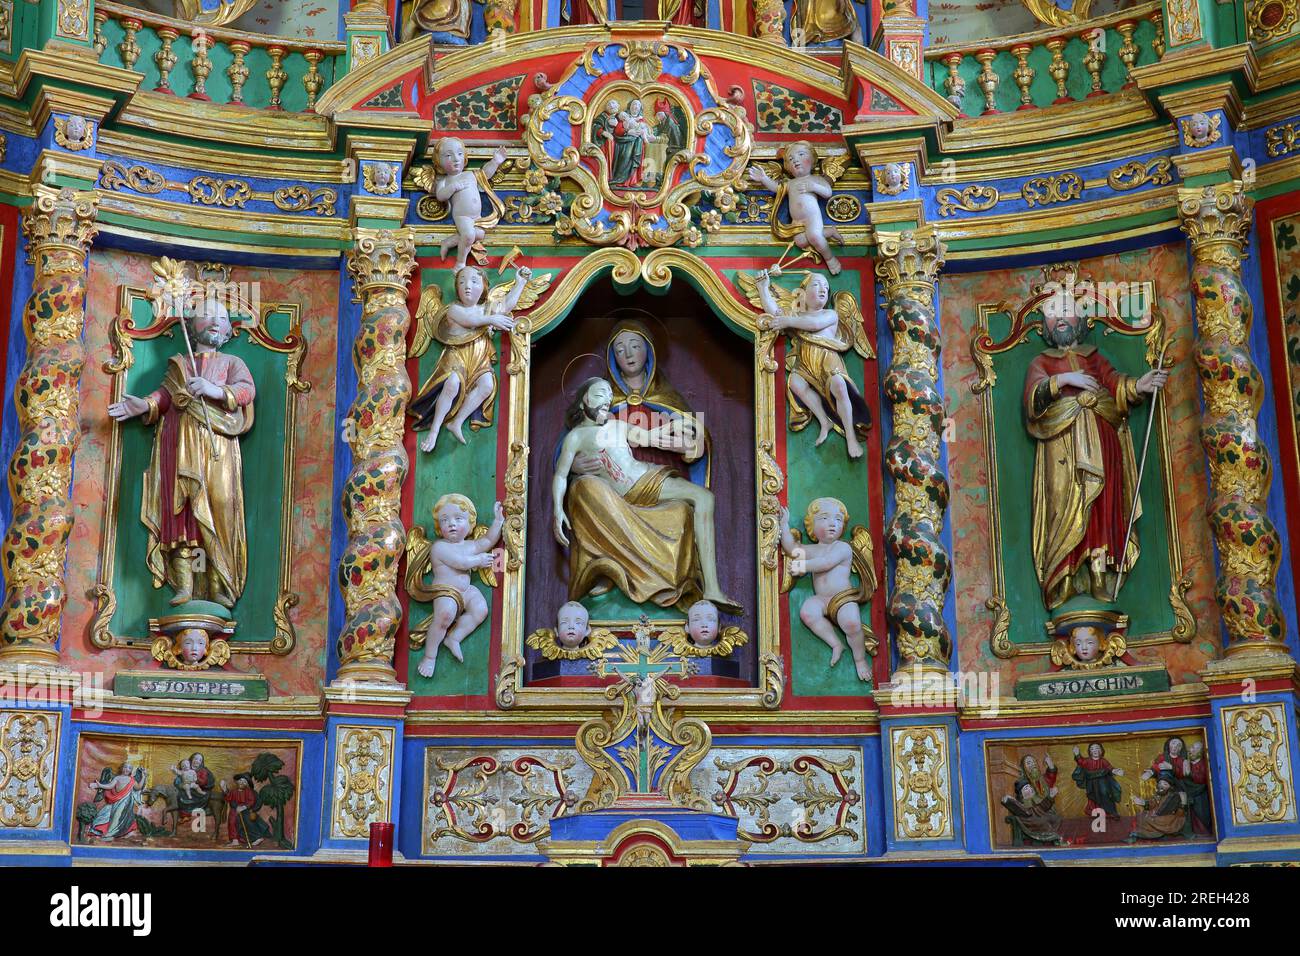 PEISEY NANCROIX, NORTHERN ALPS, FRANCE - JUNE 6, 2023: The colorful and baroque style interior of Notre Dame des Vernettes sanctuary Stock Photo